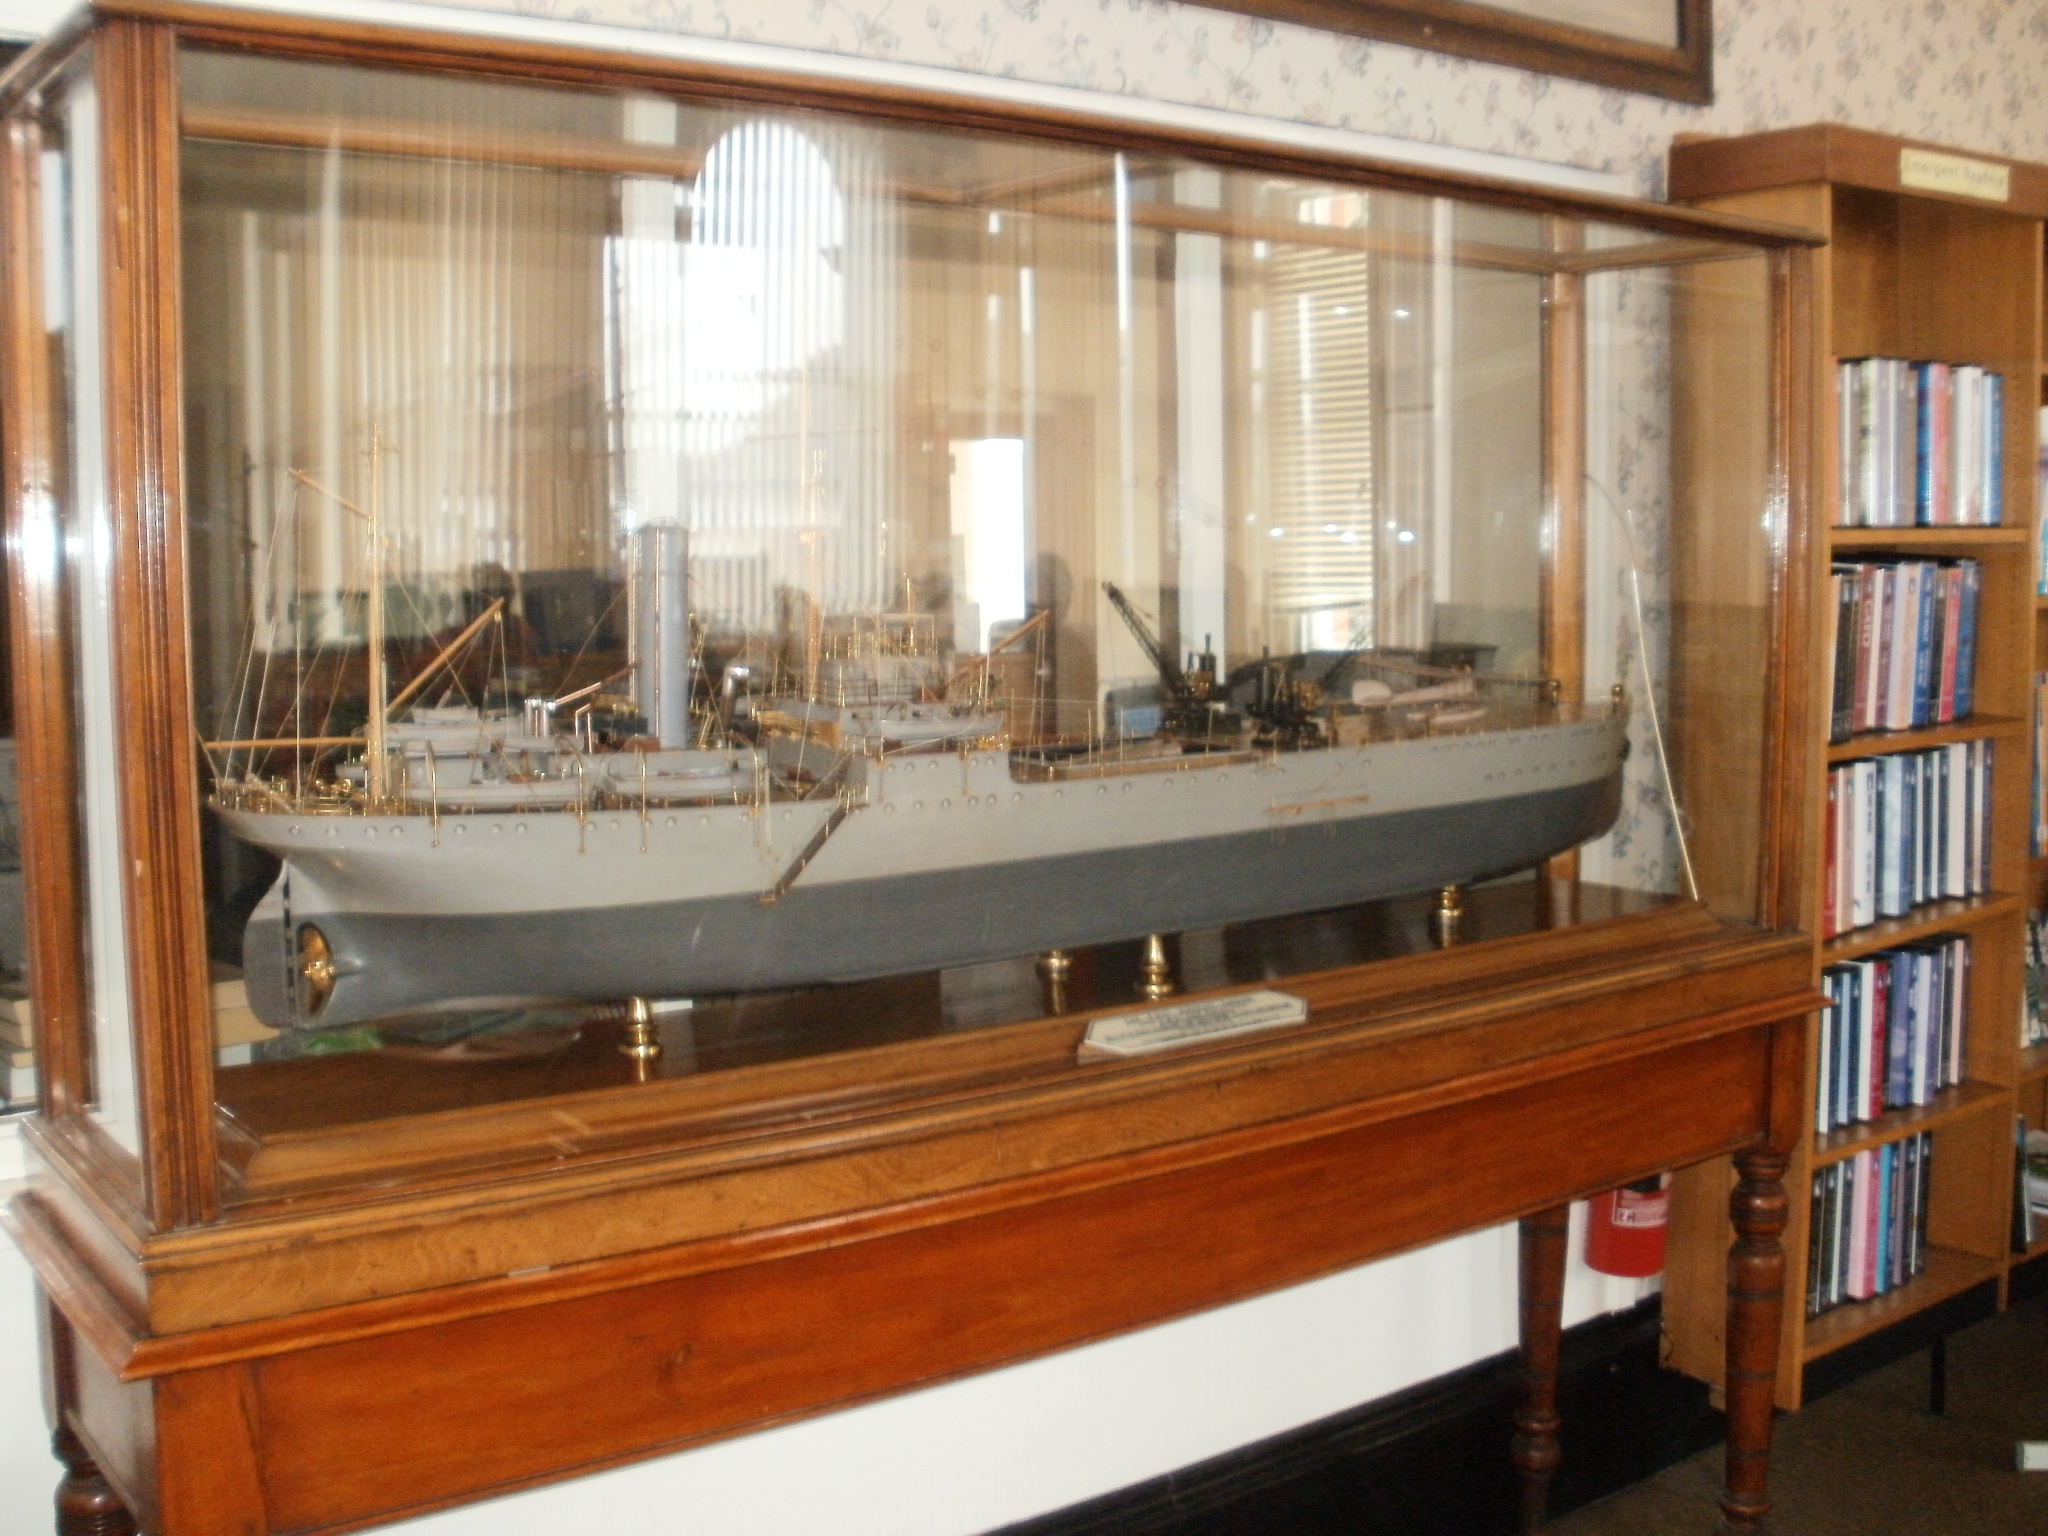 Builders' model of Ark Royal at the Blyth Library